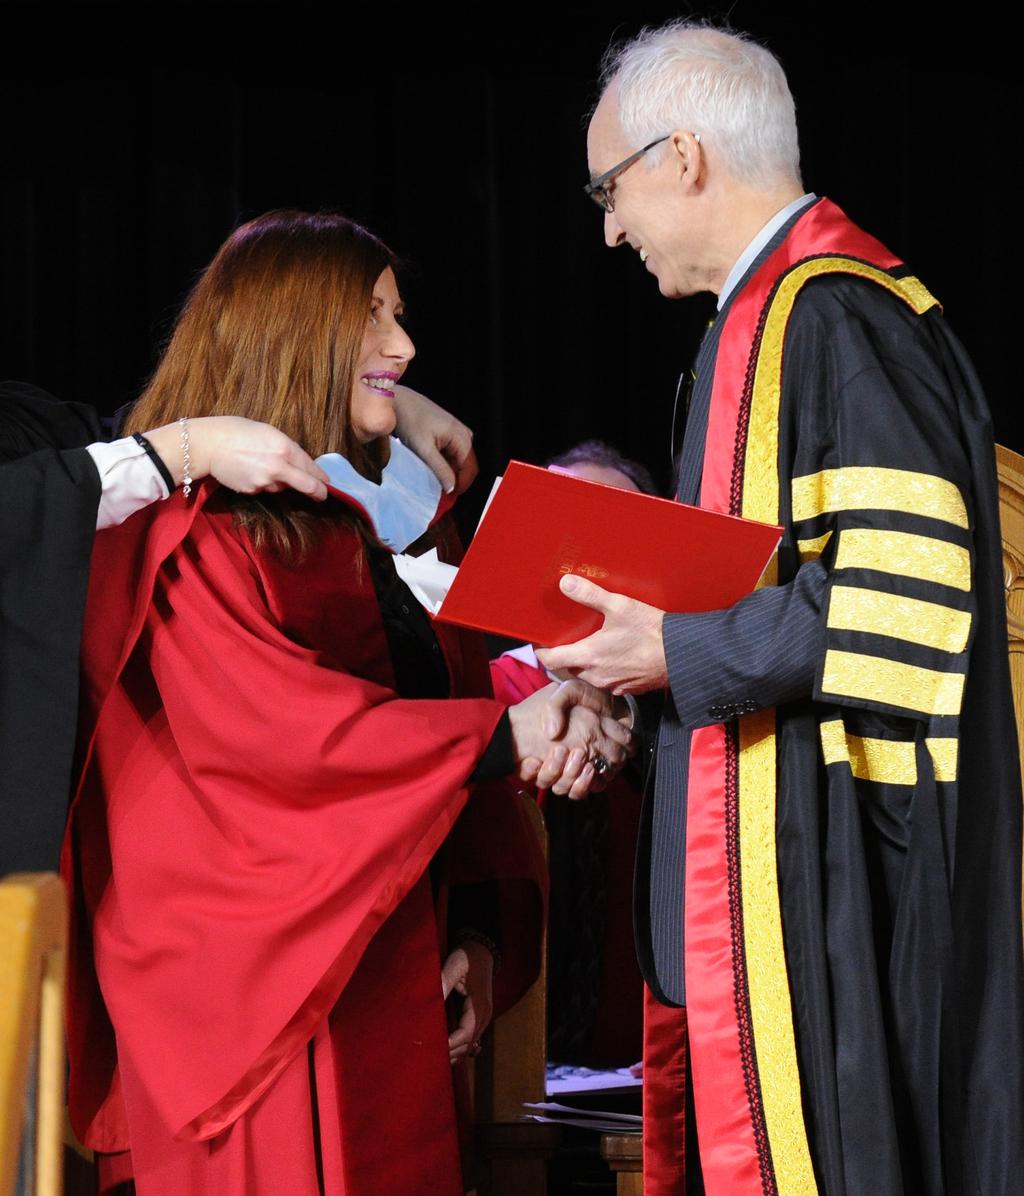 Champion for helping others receives Honorary Doctorate at winter convocation A champion for innovative cancer research with a passion for helping others, Suzi Beber was honoured with an honorary